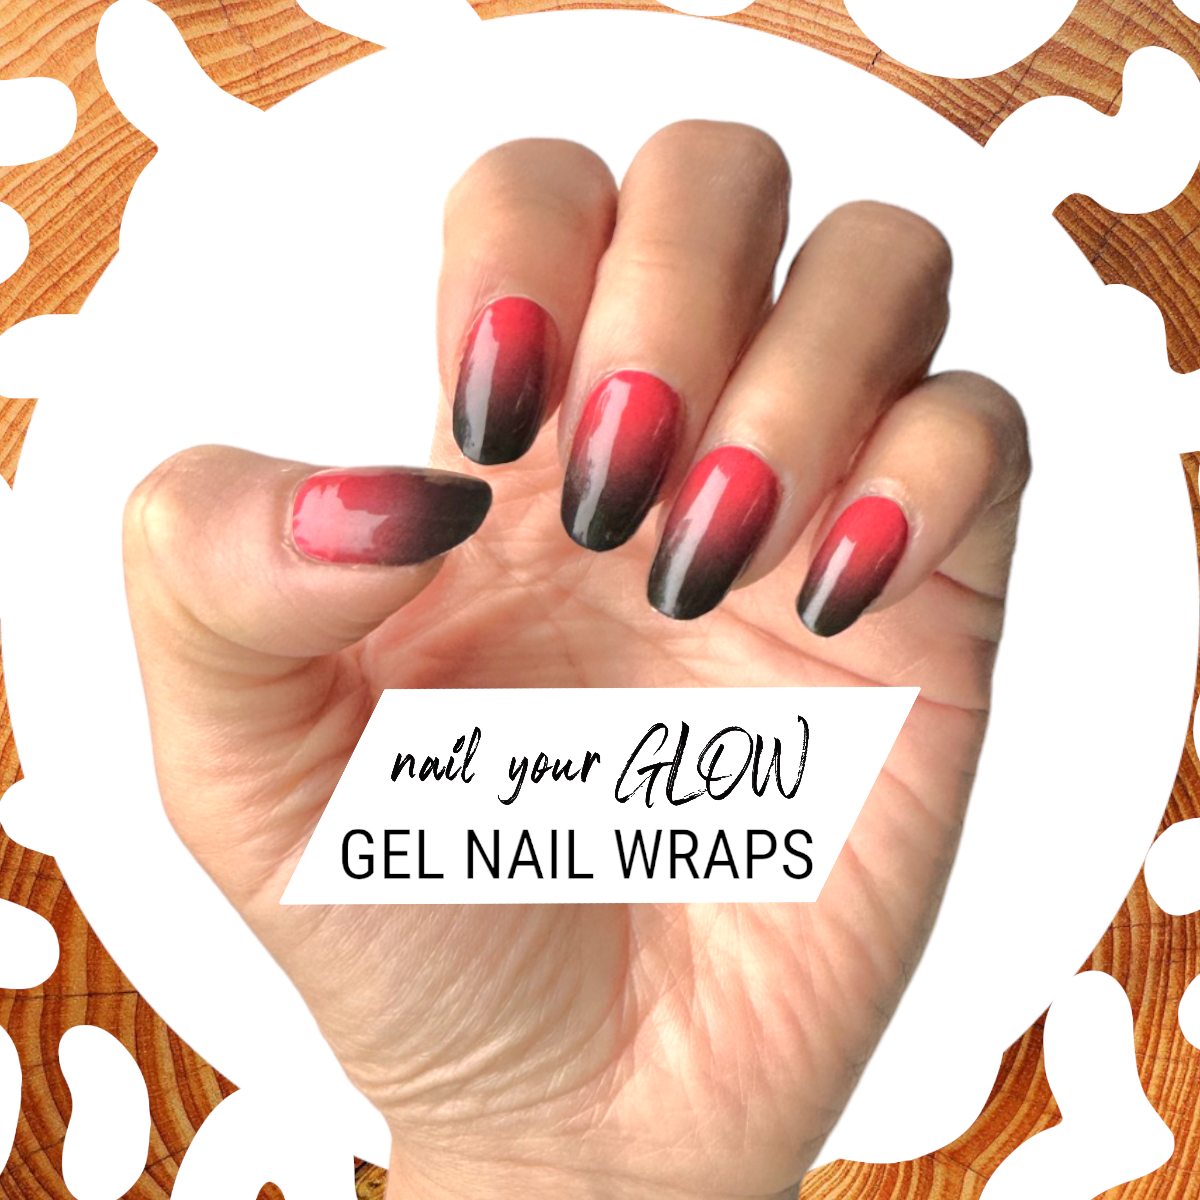 I AM MAGIC - 20 Gel Nail Wraps by Nail Your GLOW (Ombre Red to Black)